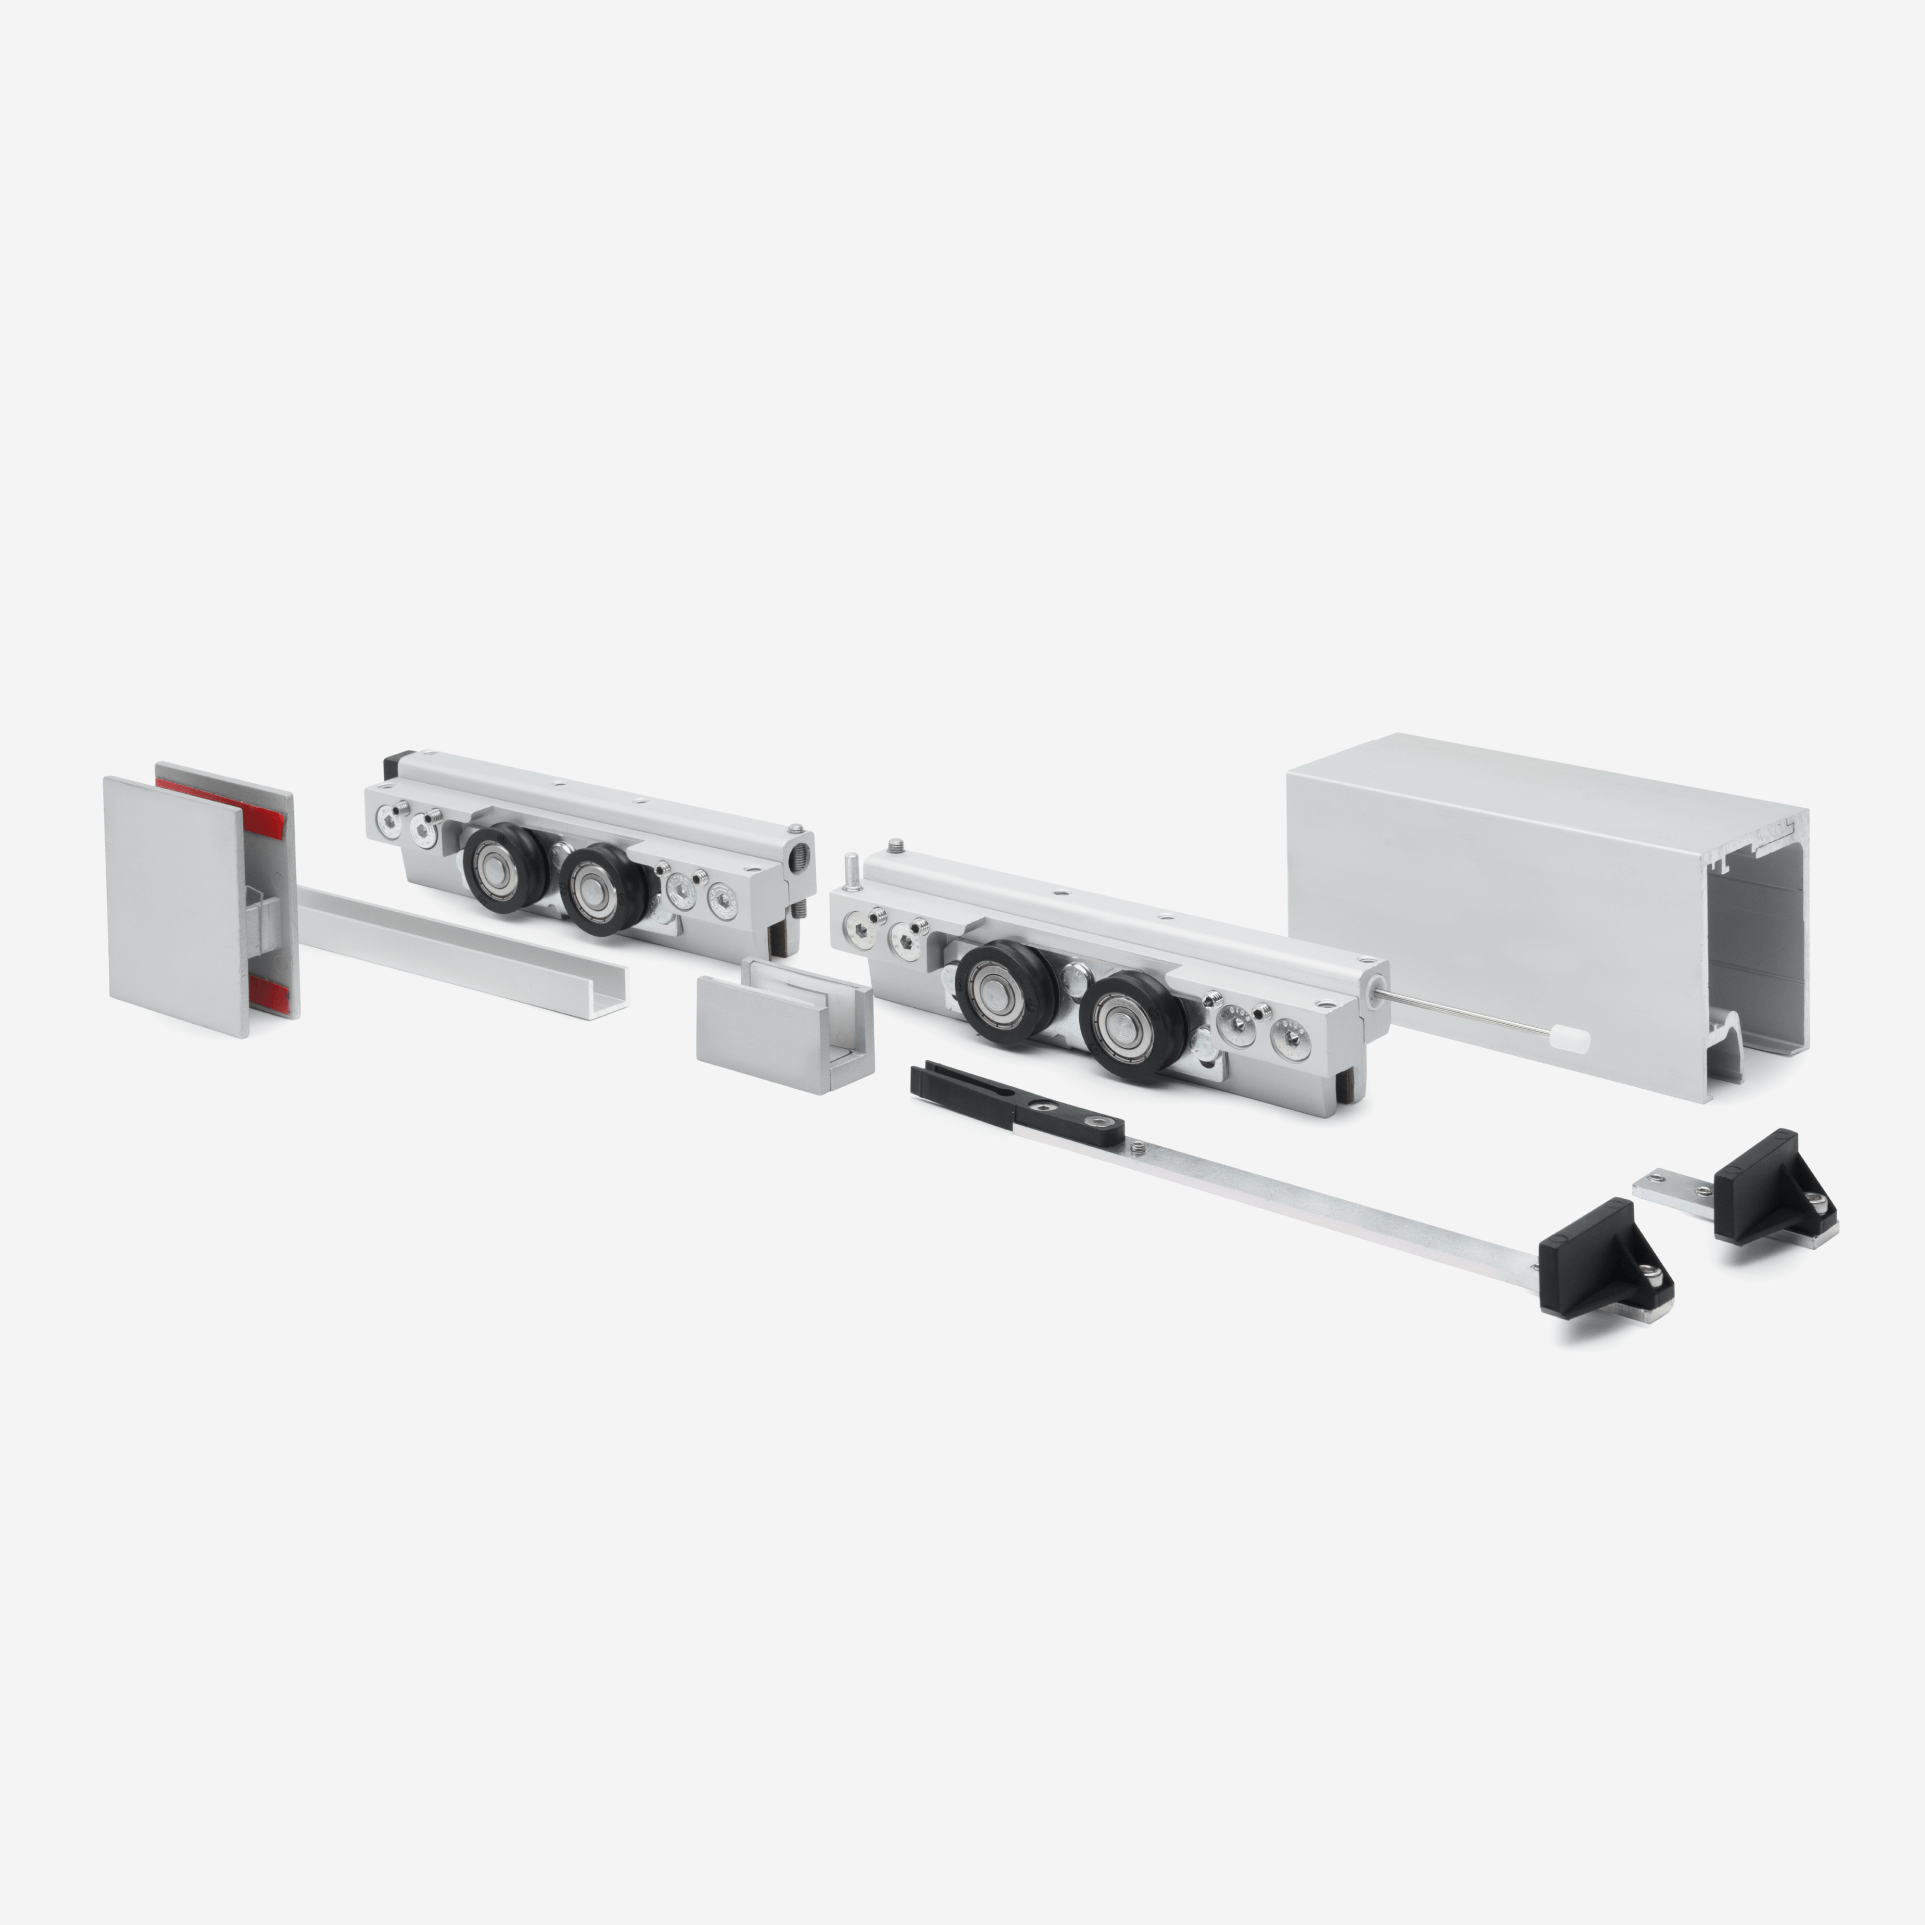 CGS-200 Wall or Ceiling Mount Sliding Door and Fixed Panel Kit with Anti-Shock Mechanism and 157" Track